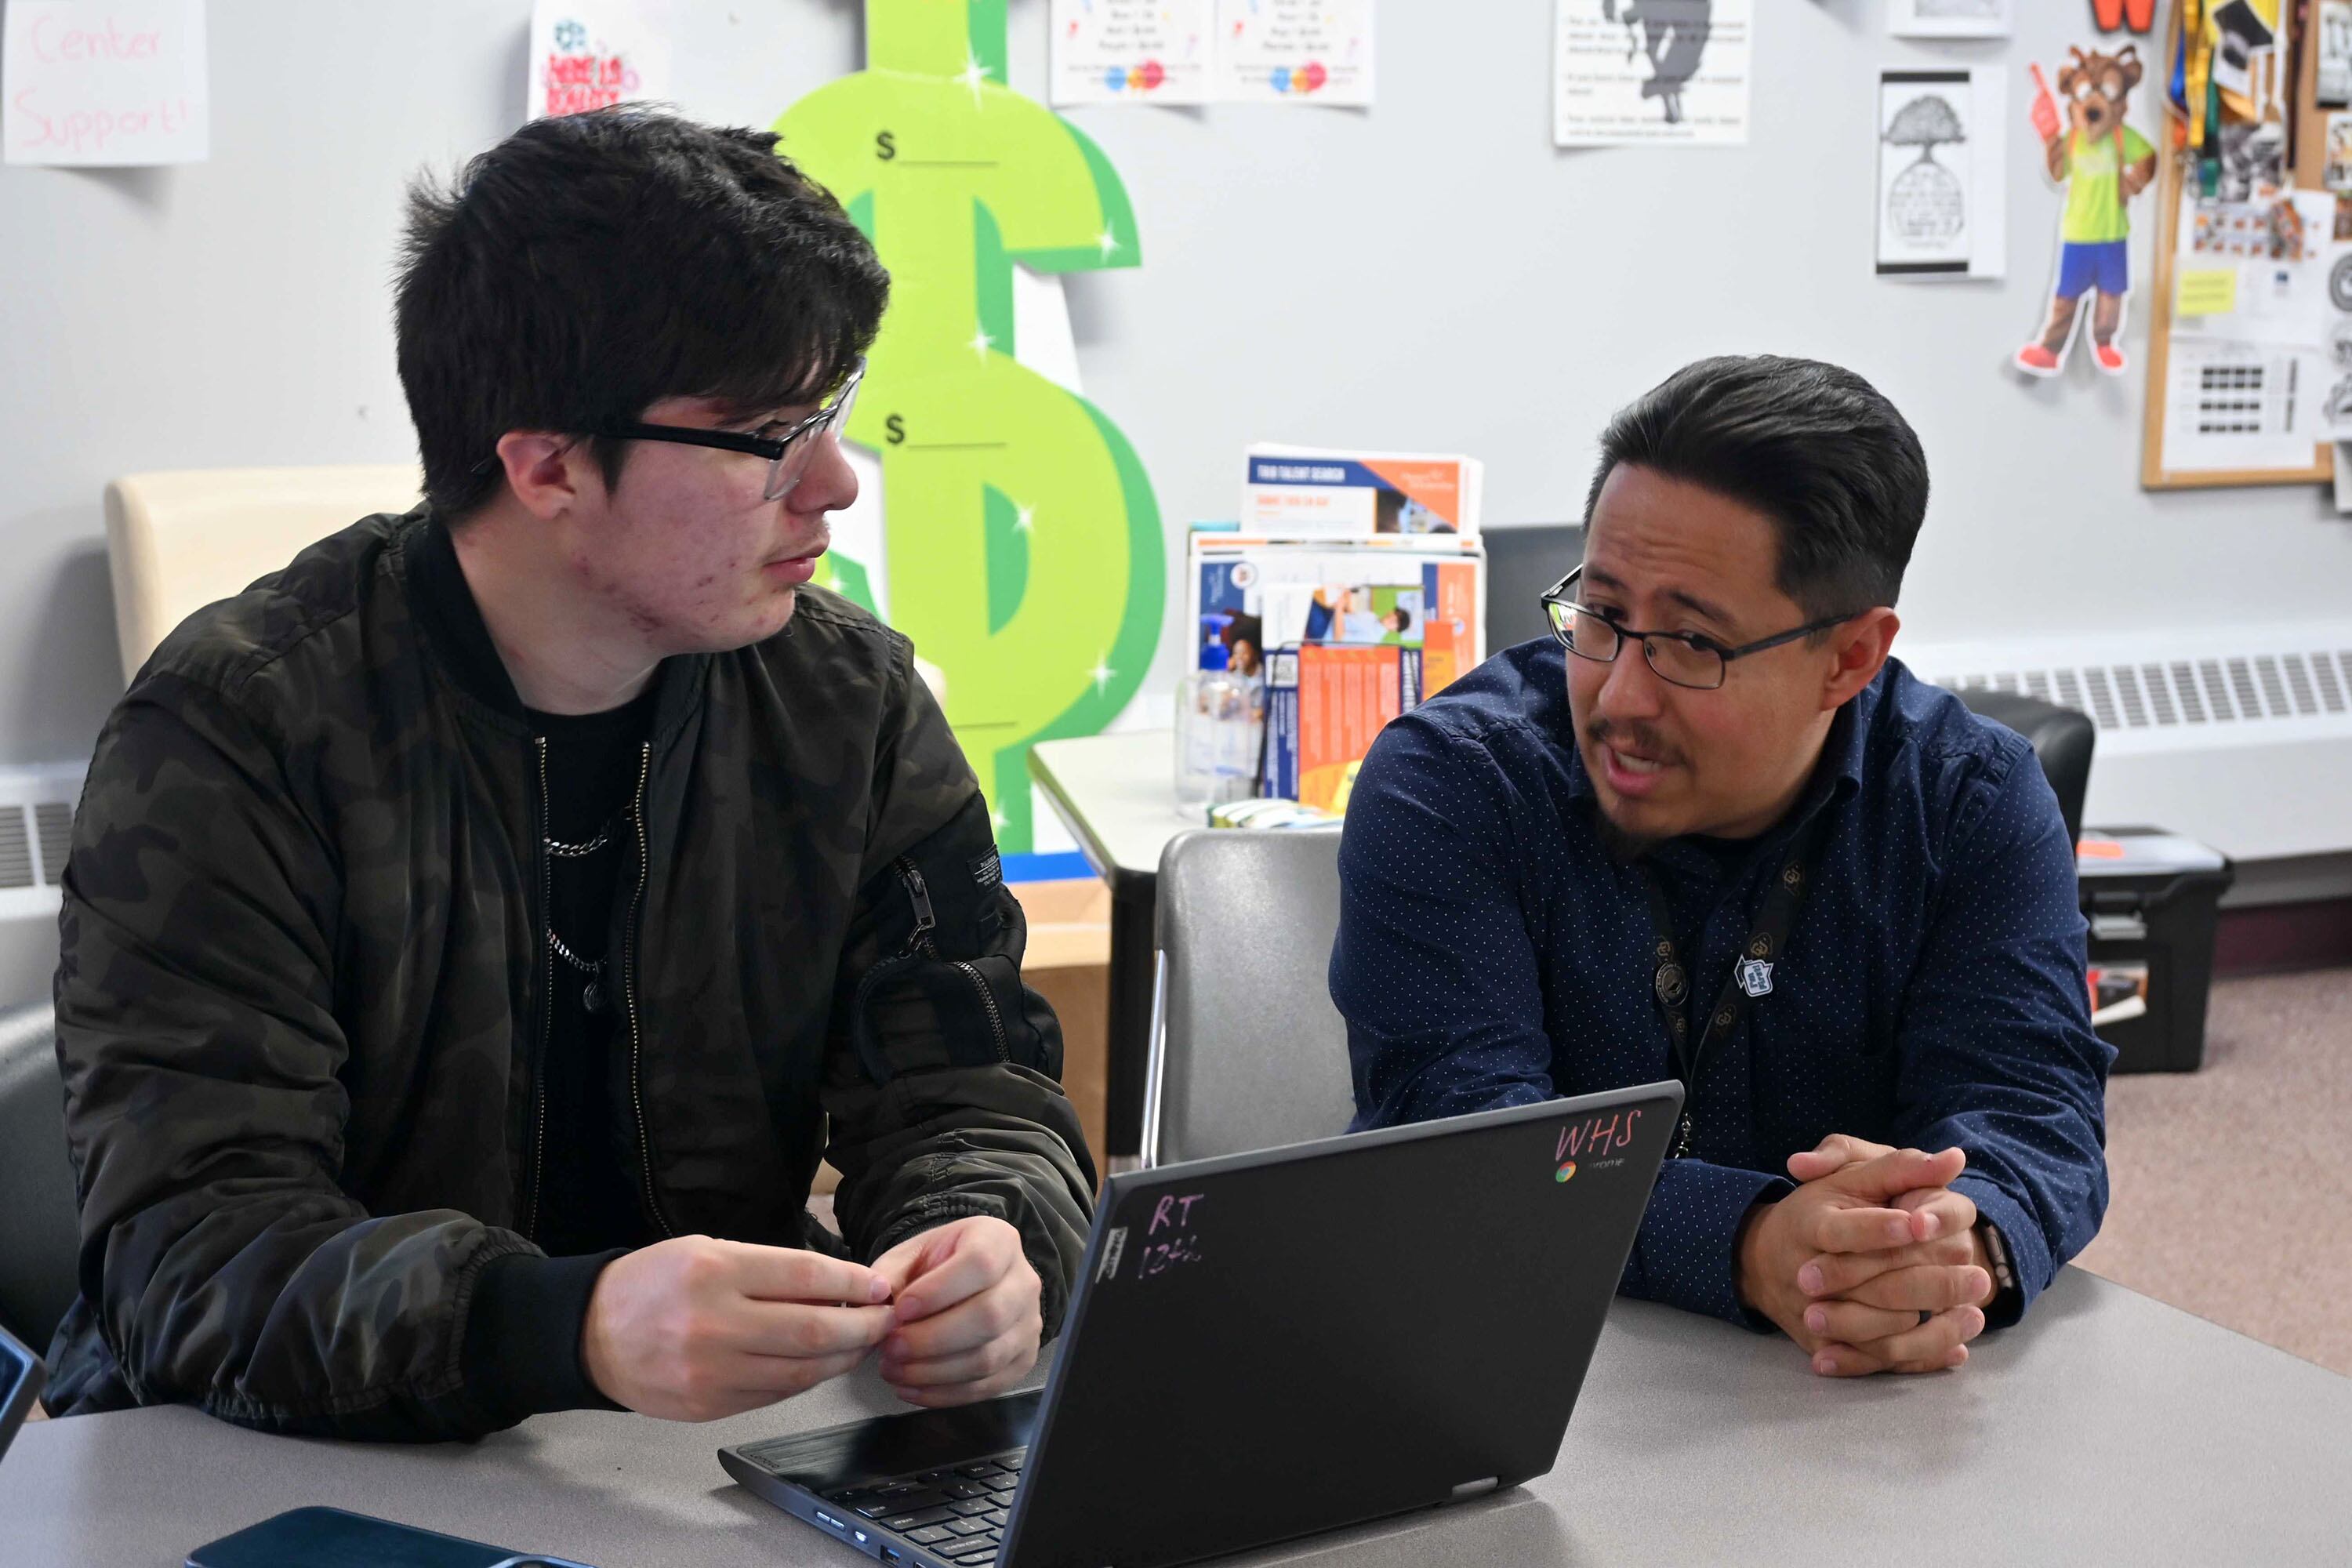 One high school student and one adult sit at a desk behind a laptop with a whiteboard in the background.